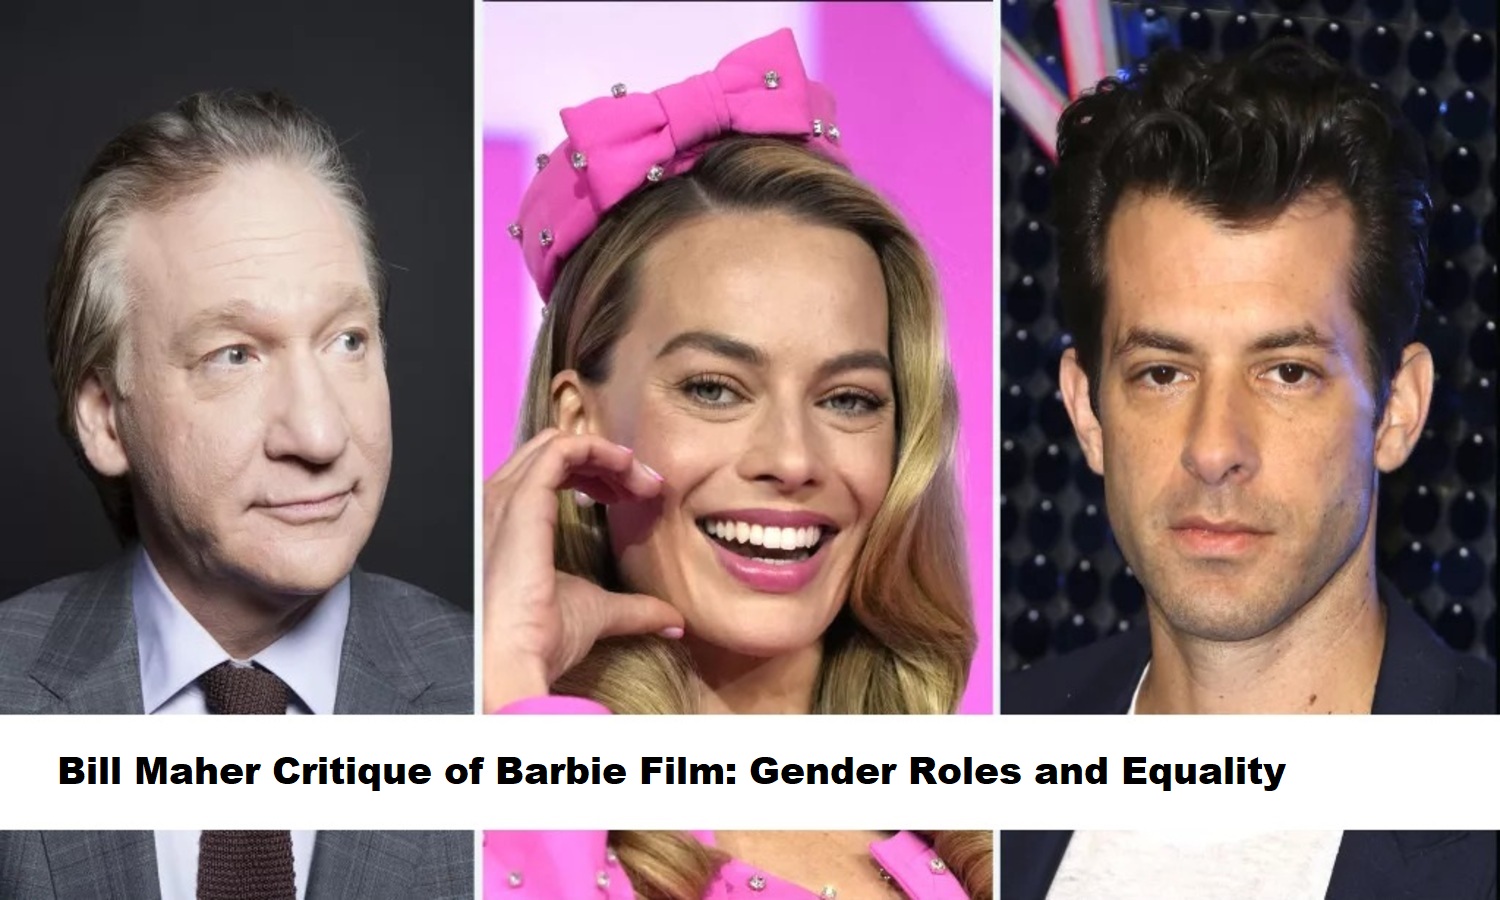 Bill Maher Critique of Barbie Film: Gender Roles and Equality